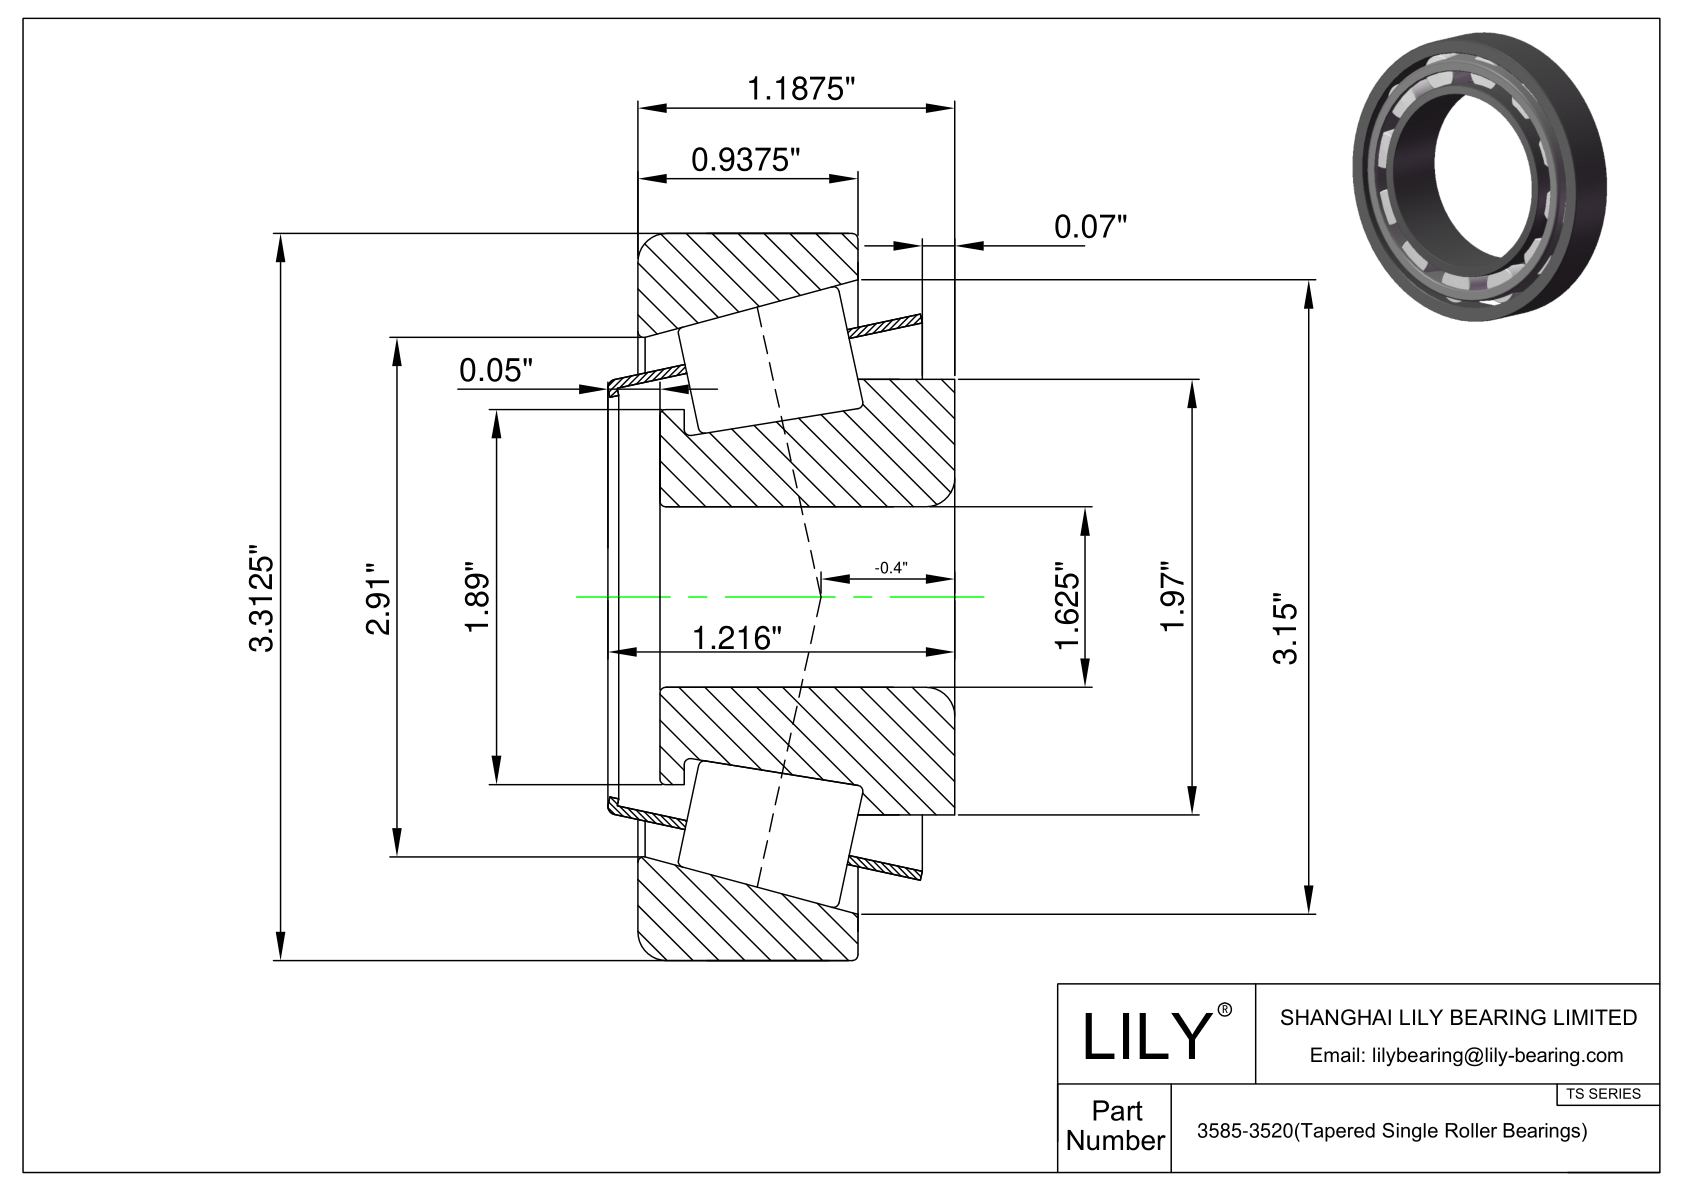 3585-3520 TS (Tapered Single Roller Bearings) (Imperial) cad drawing